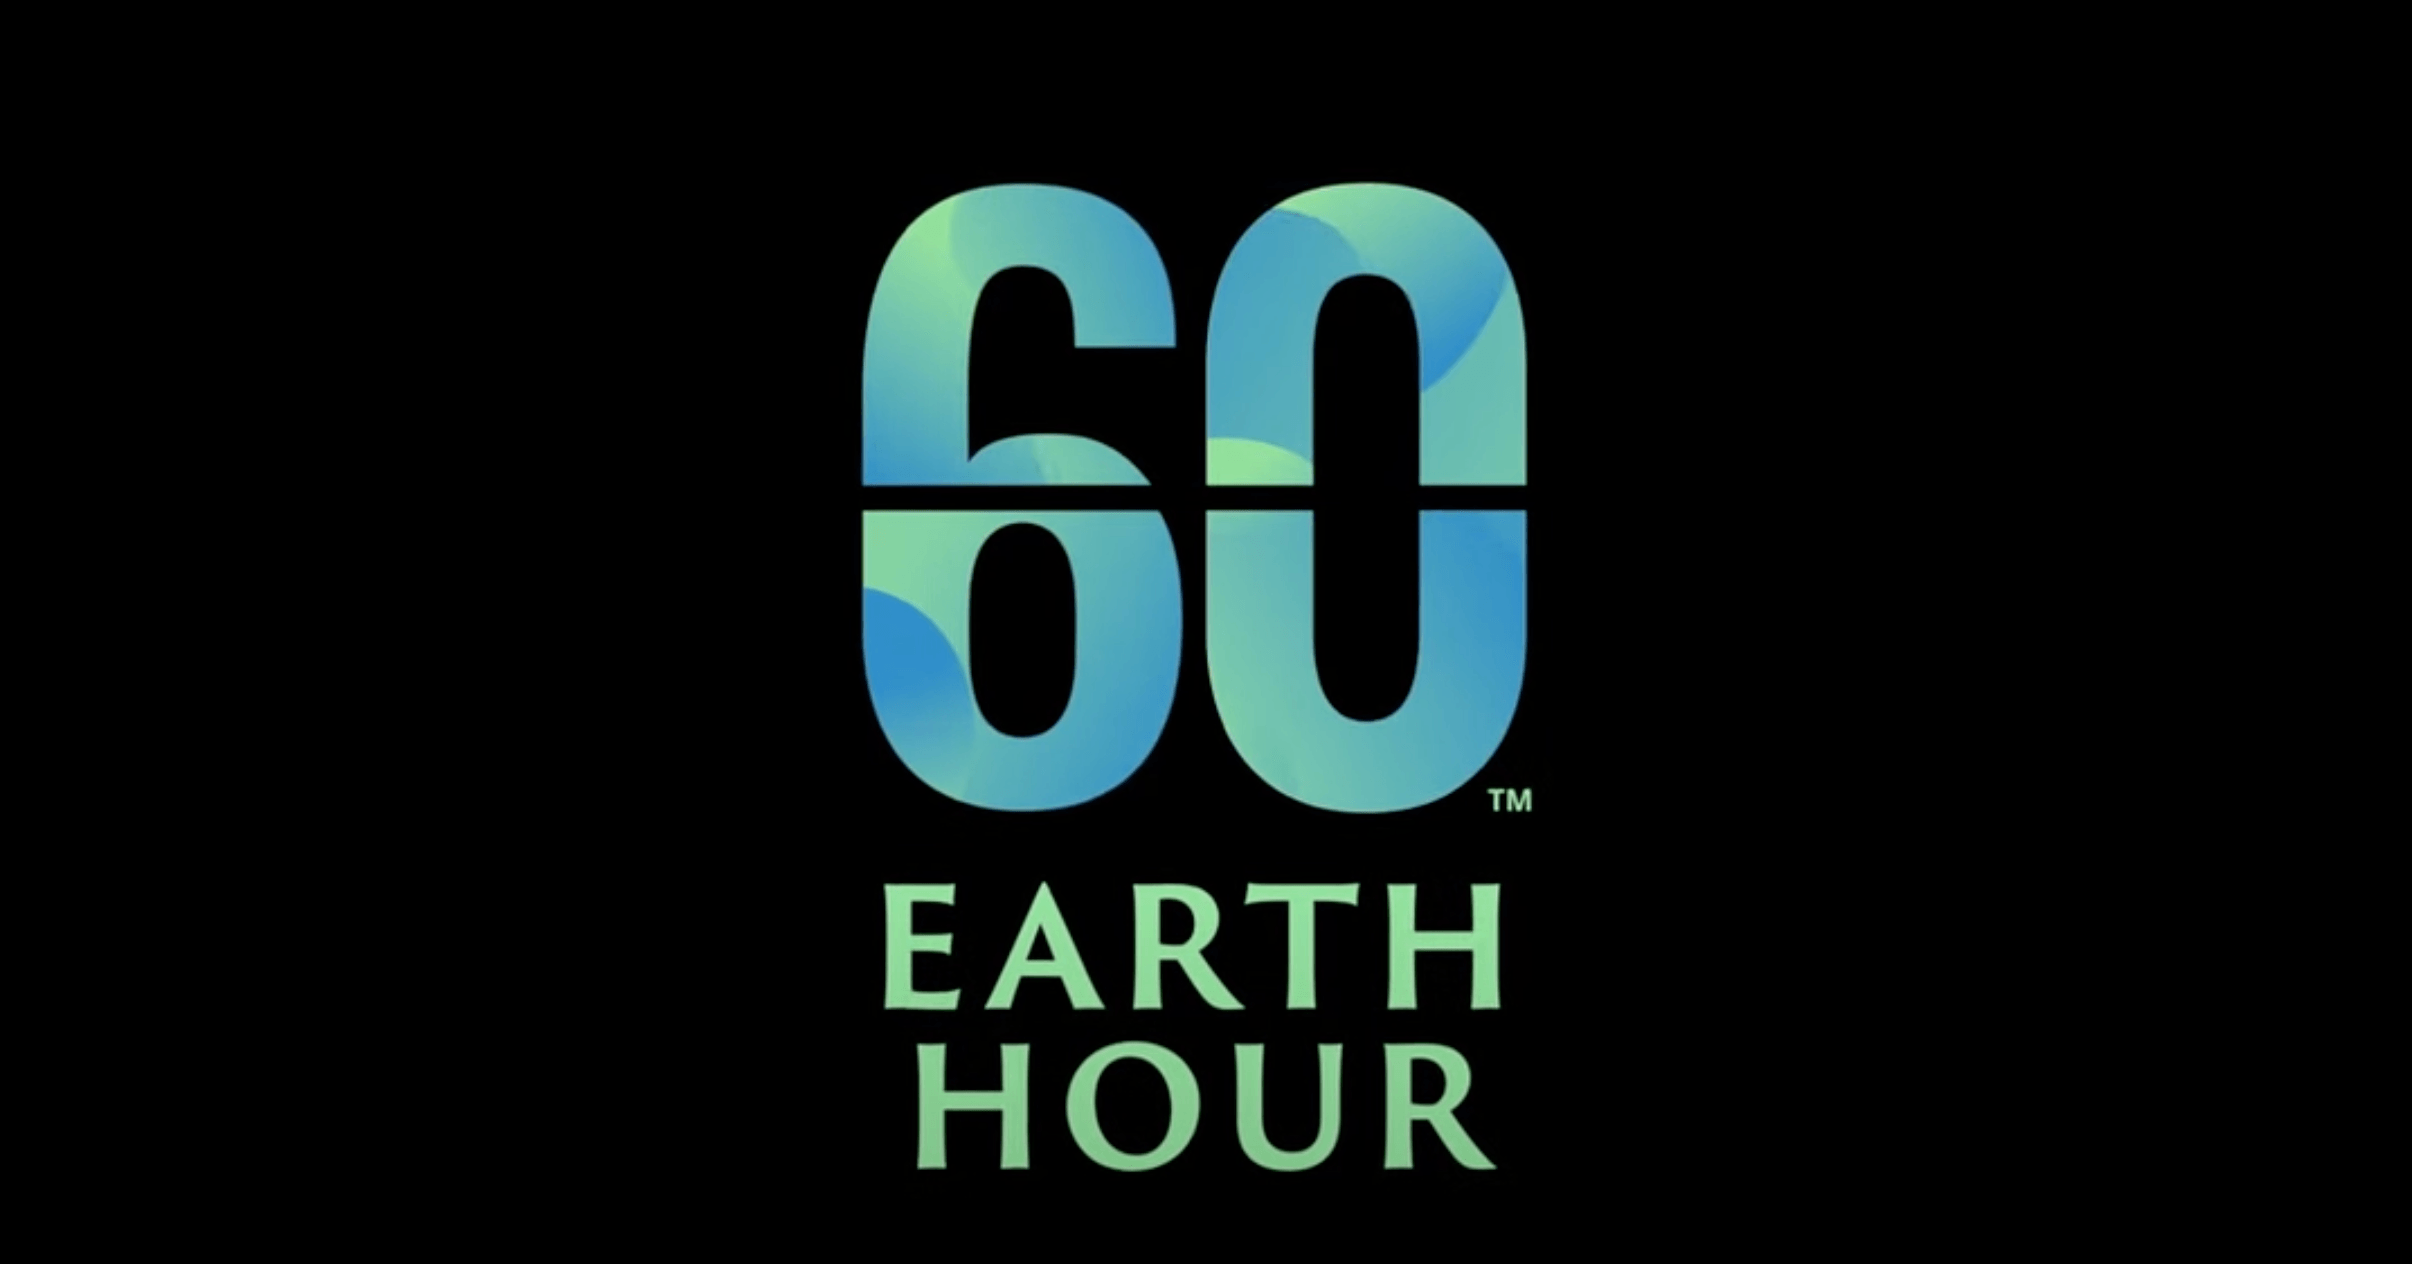 LIST 2023 Earth Hour events and activities in the Philippines